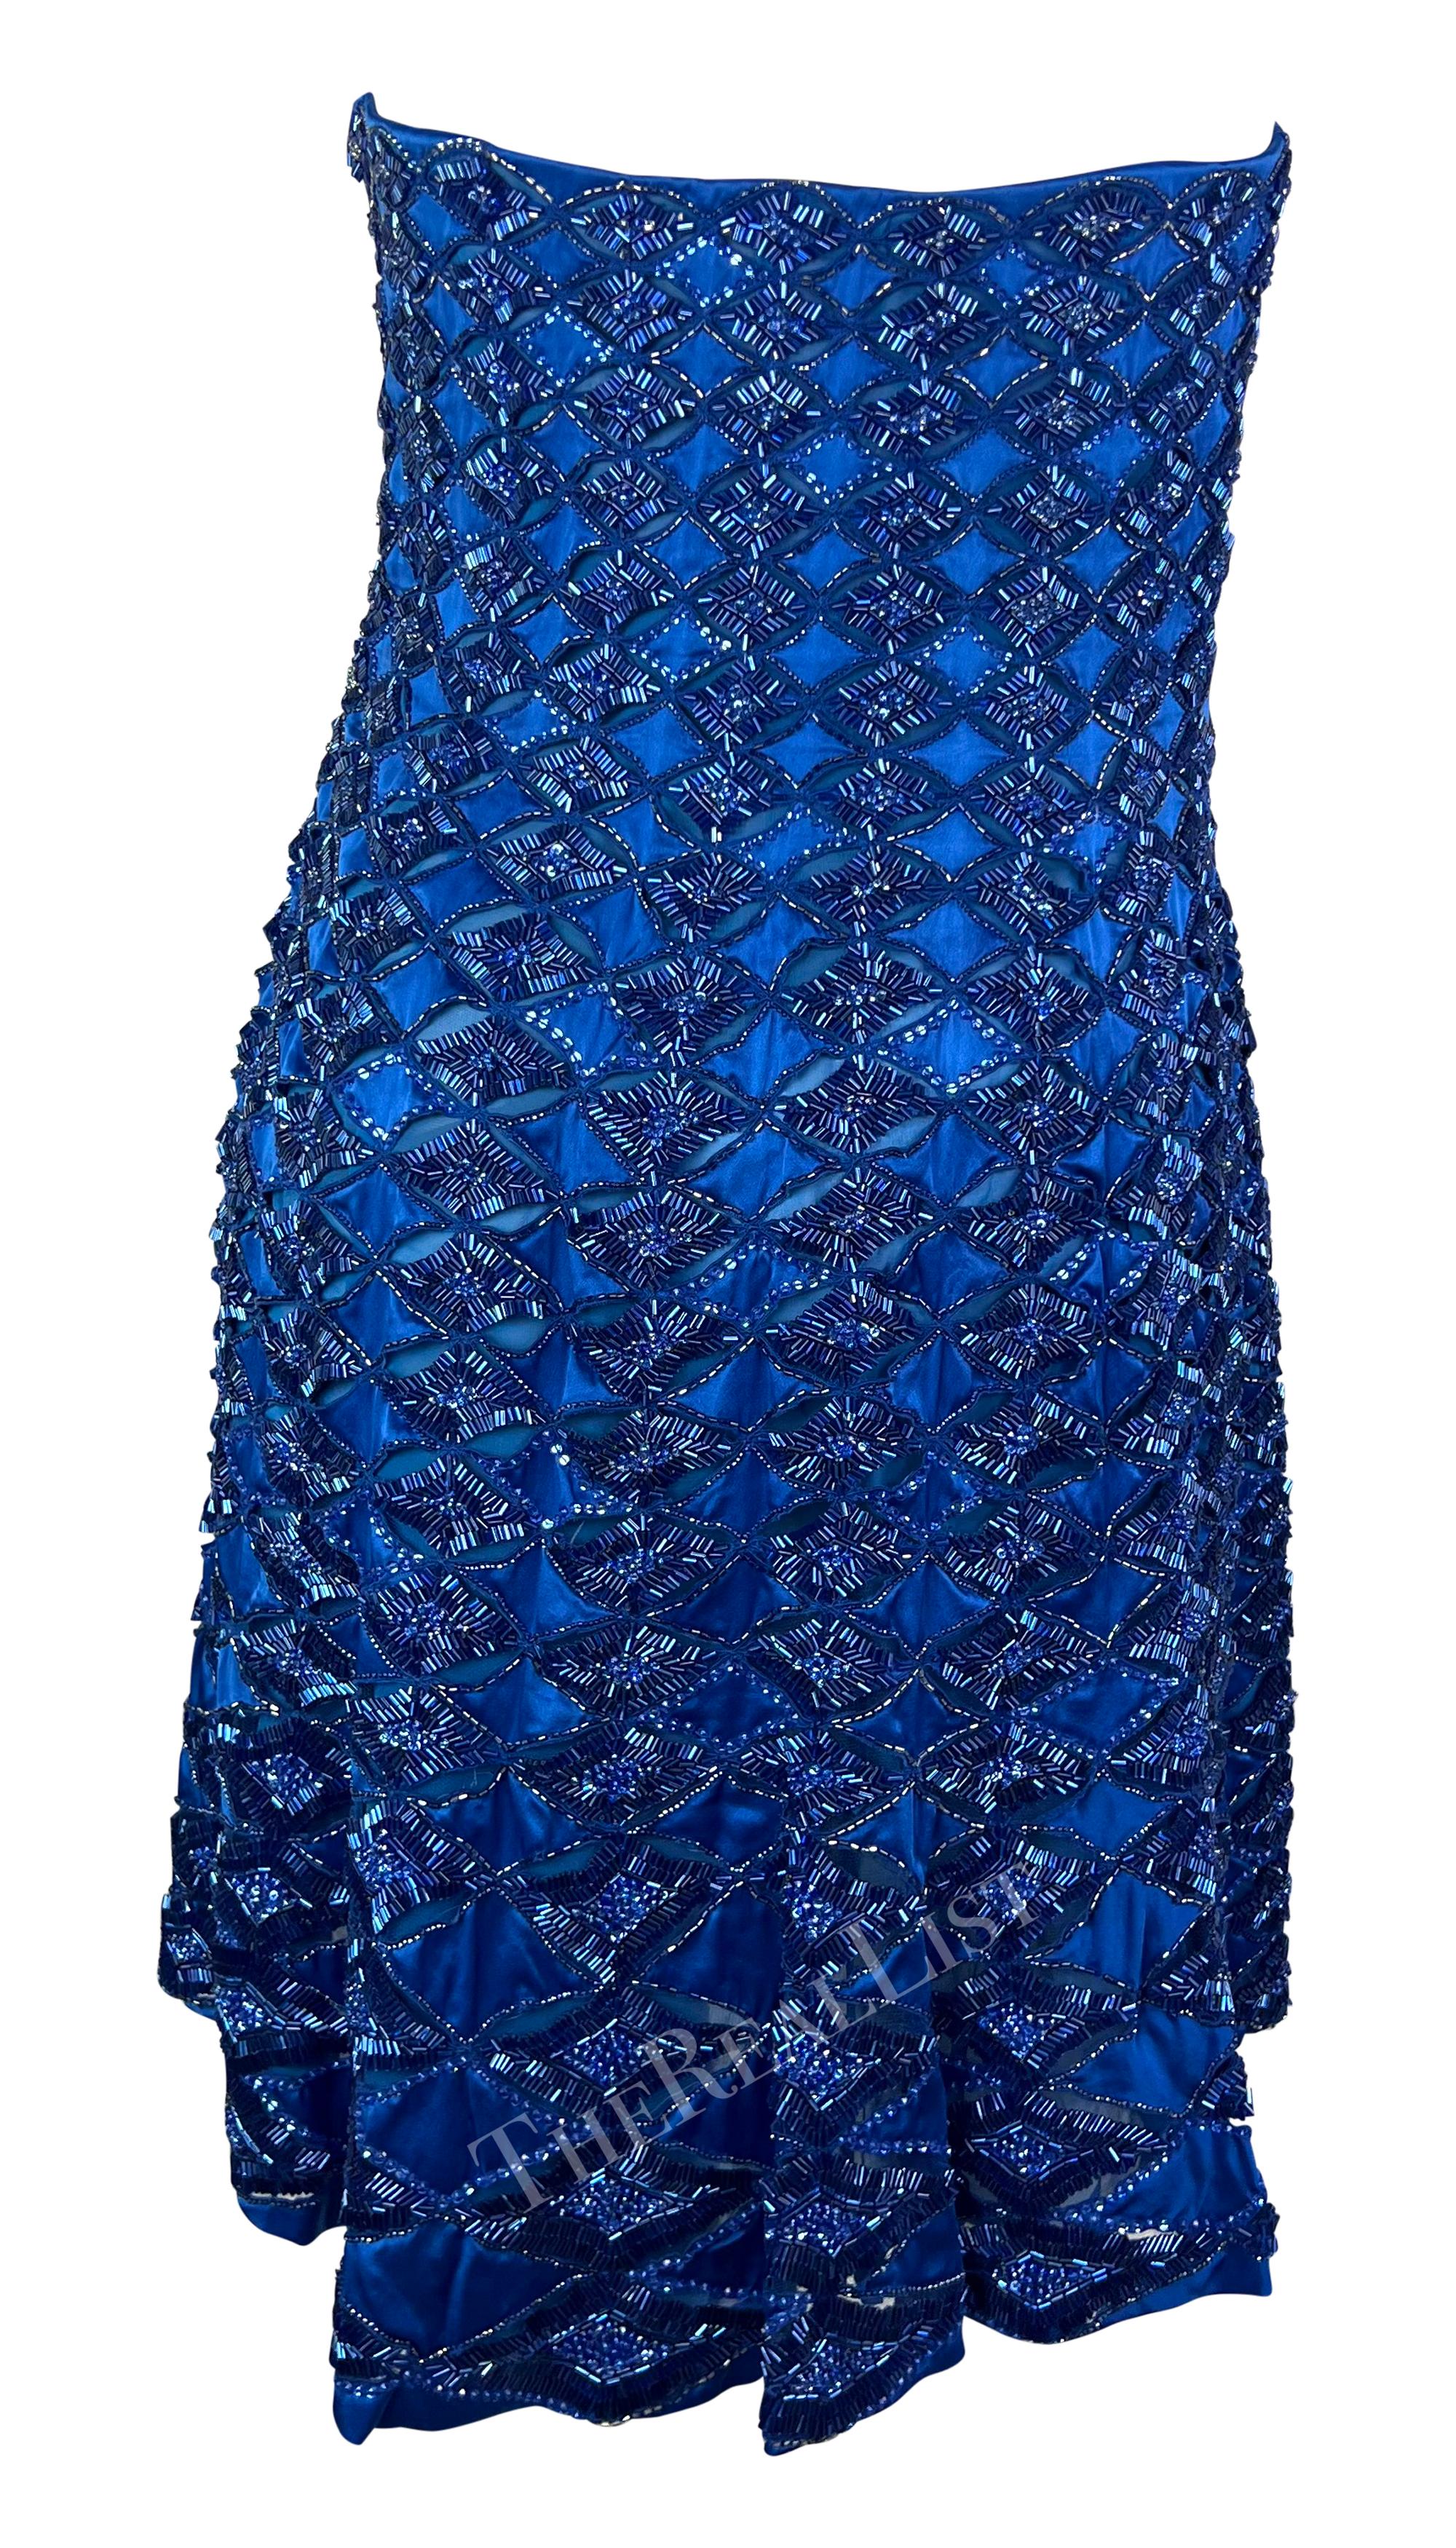 S/S 2001 Atelier Versace by Donatella Runway Blue Beaded Strapless Mini Dress For Sale 4